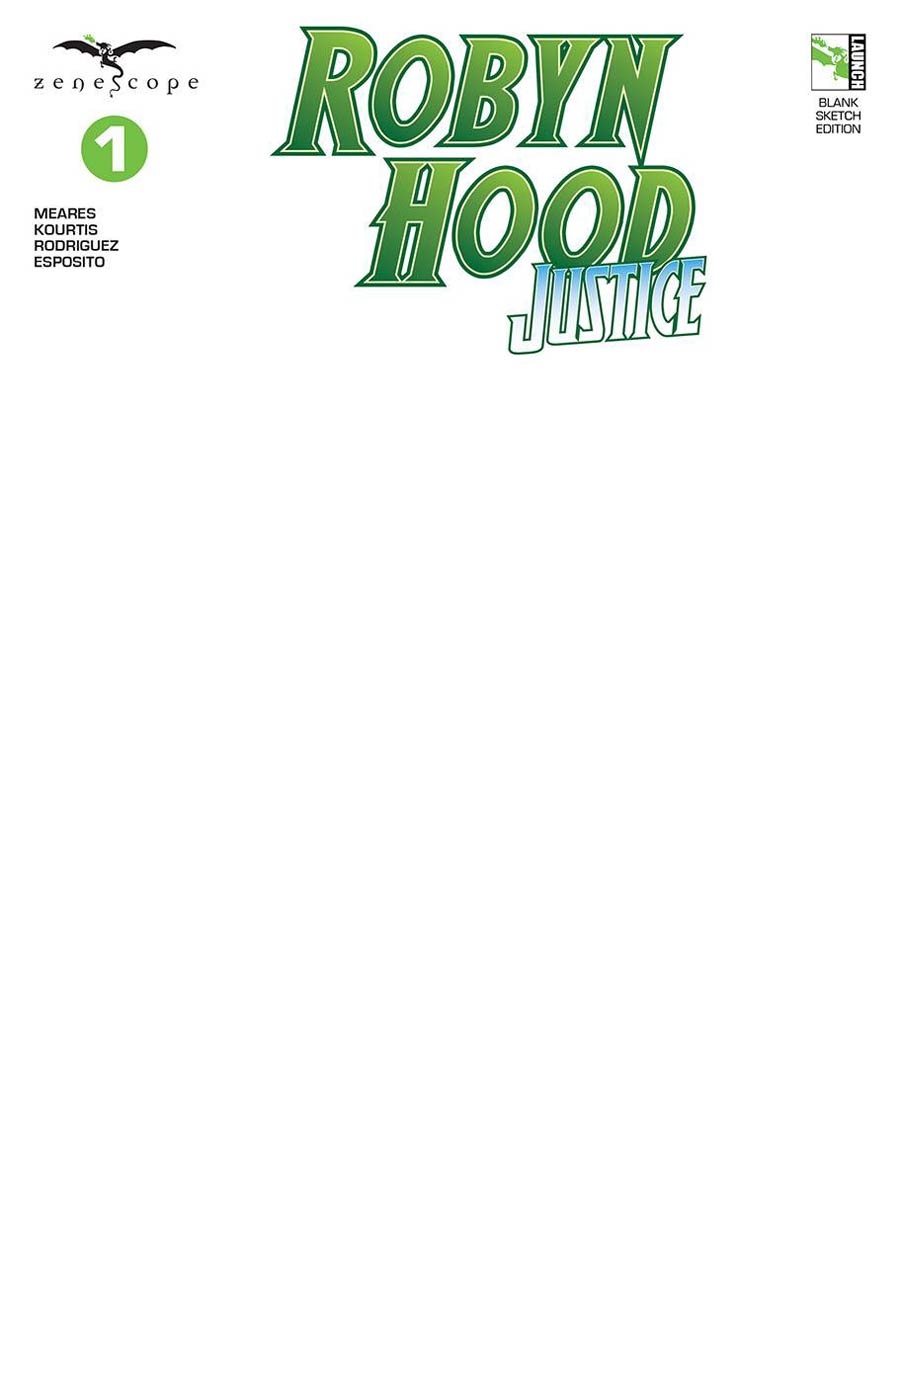 Grimm Fairy Tales Presents Robyn Hood Justice #1 Cover F Blank